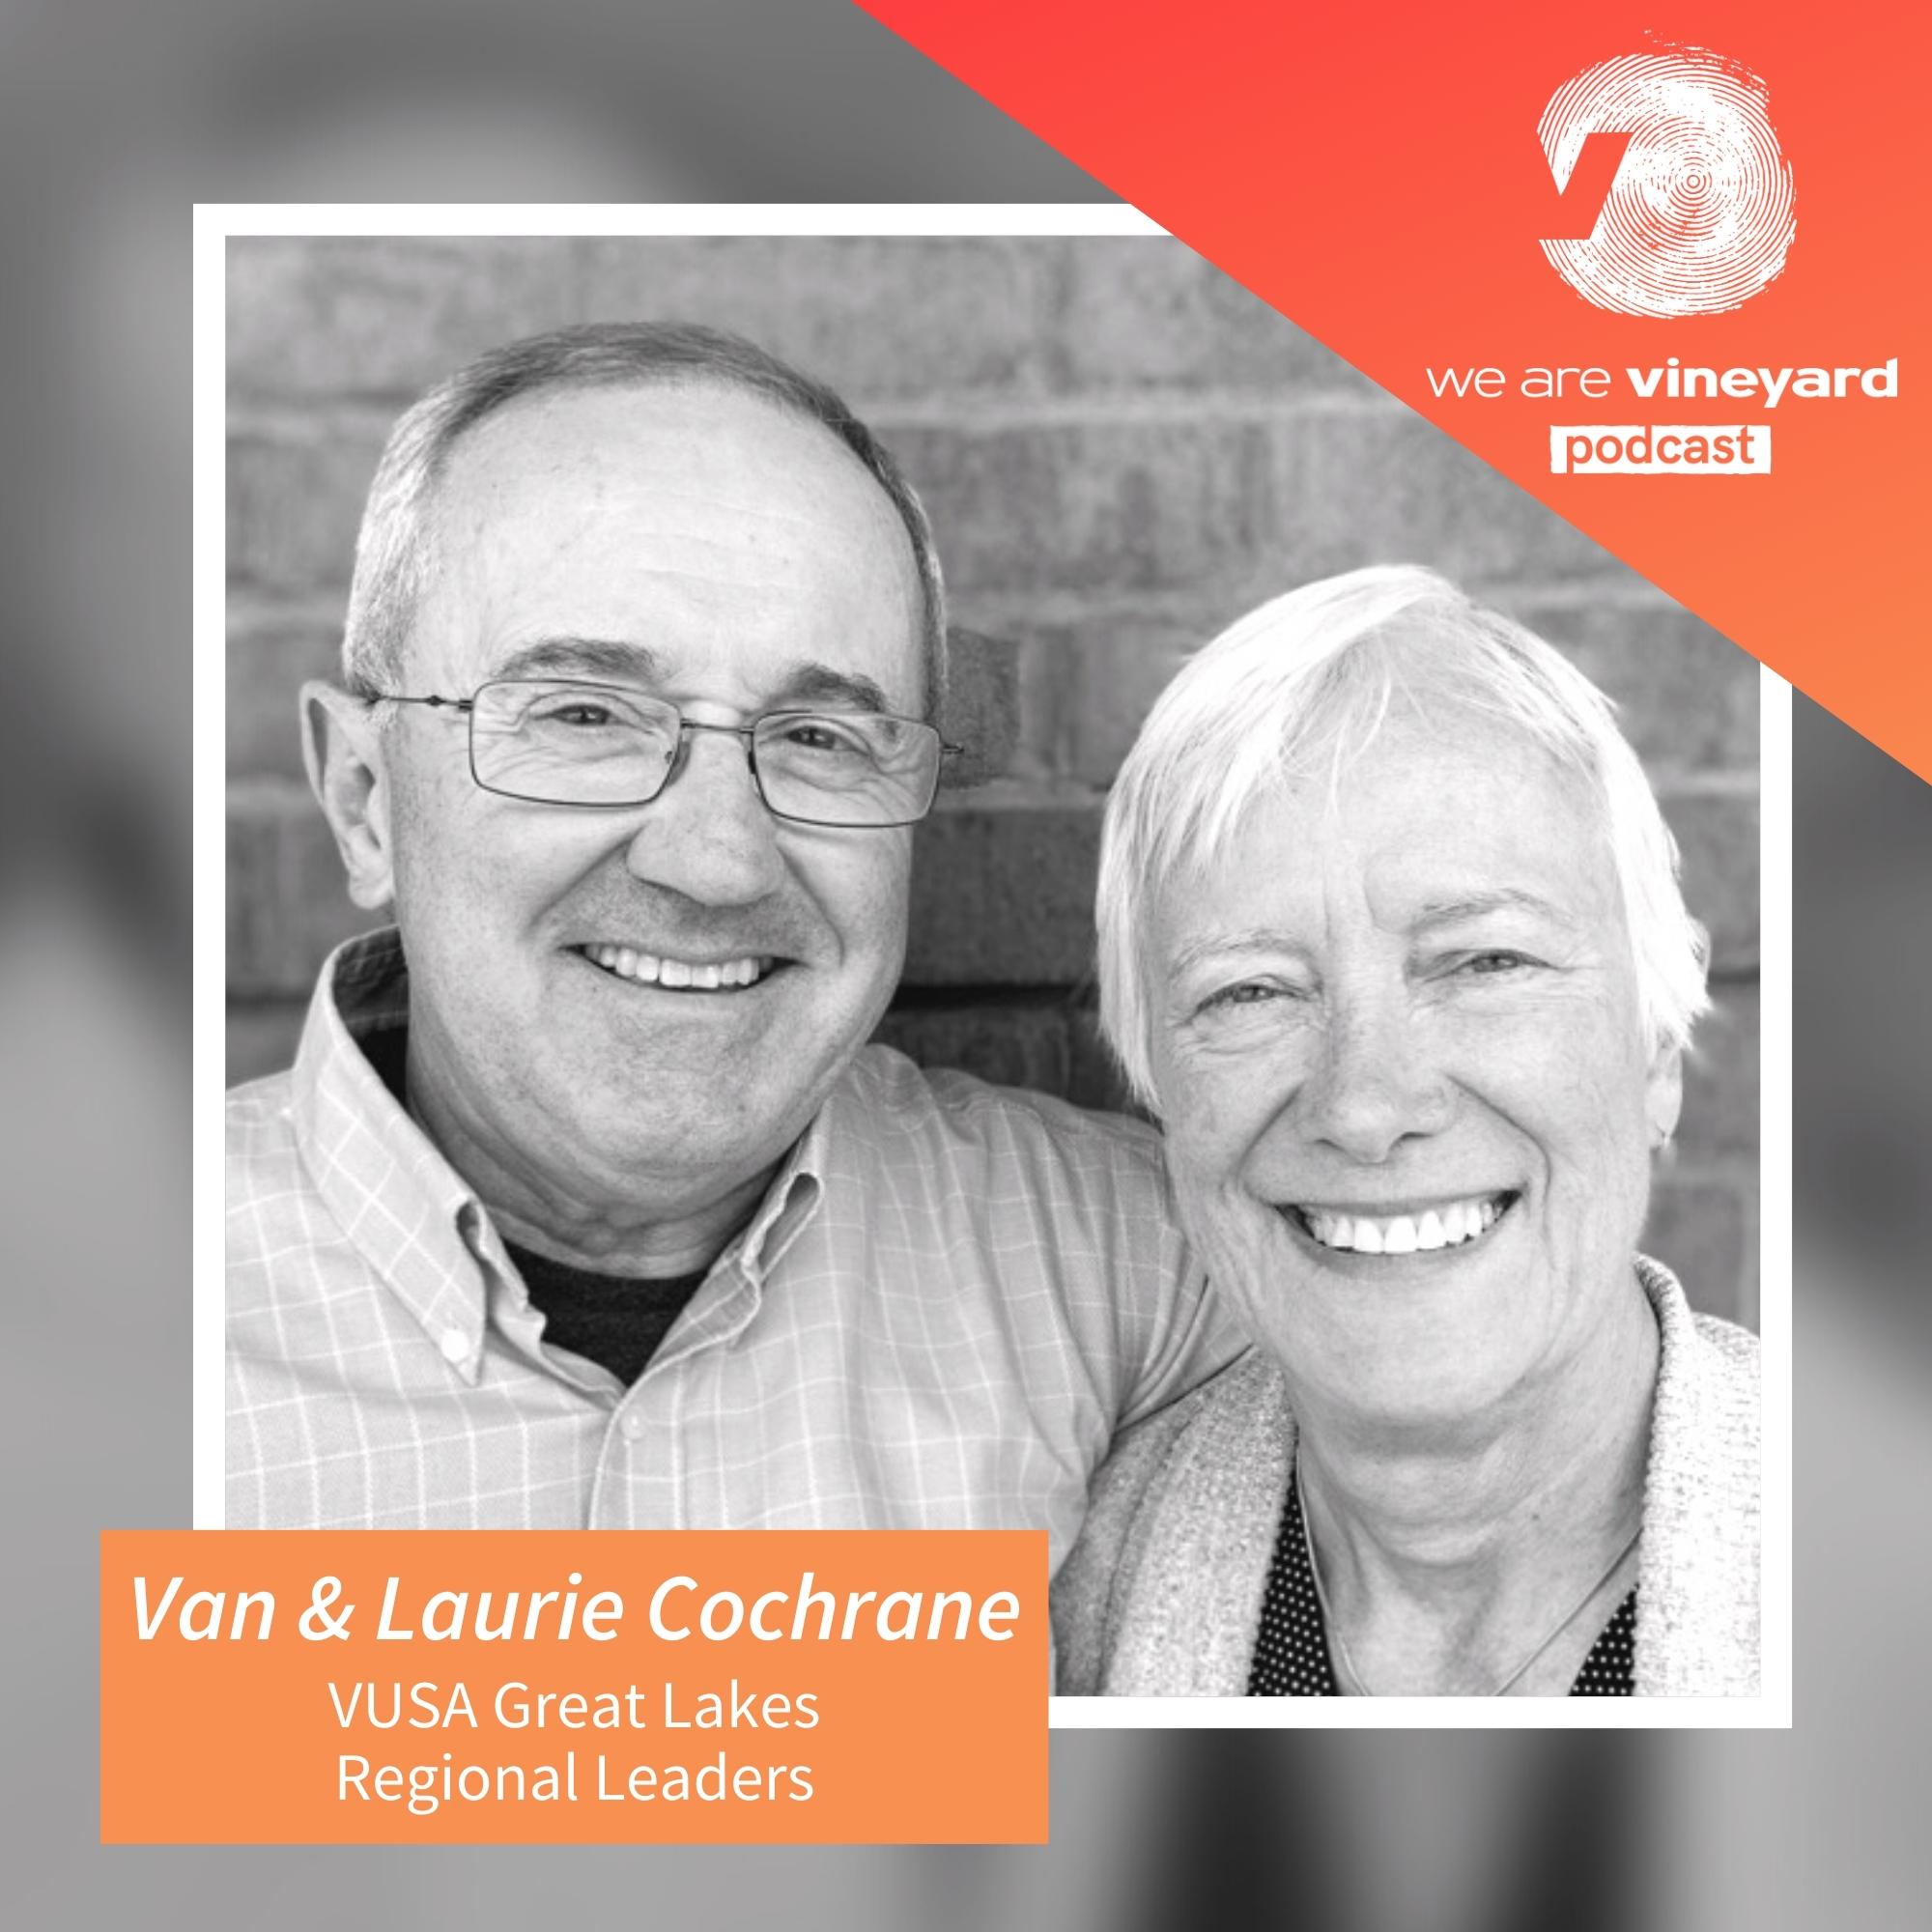 Van & Laurie Cochrane: Our Journey Into The Vineyard